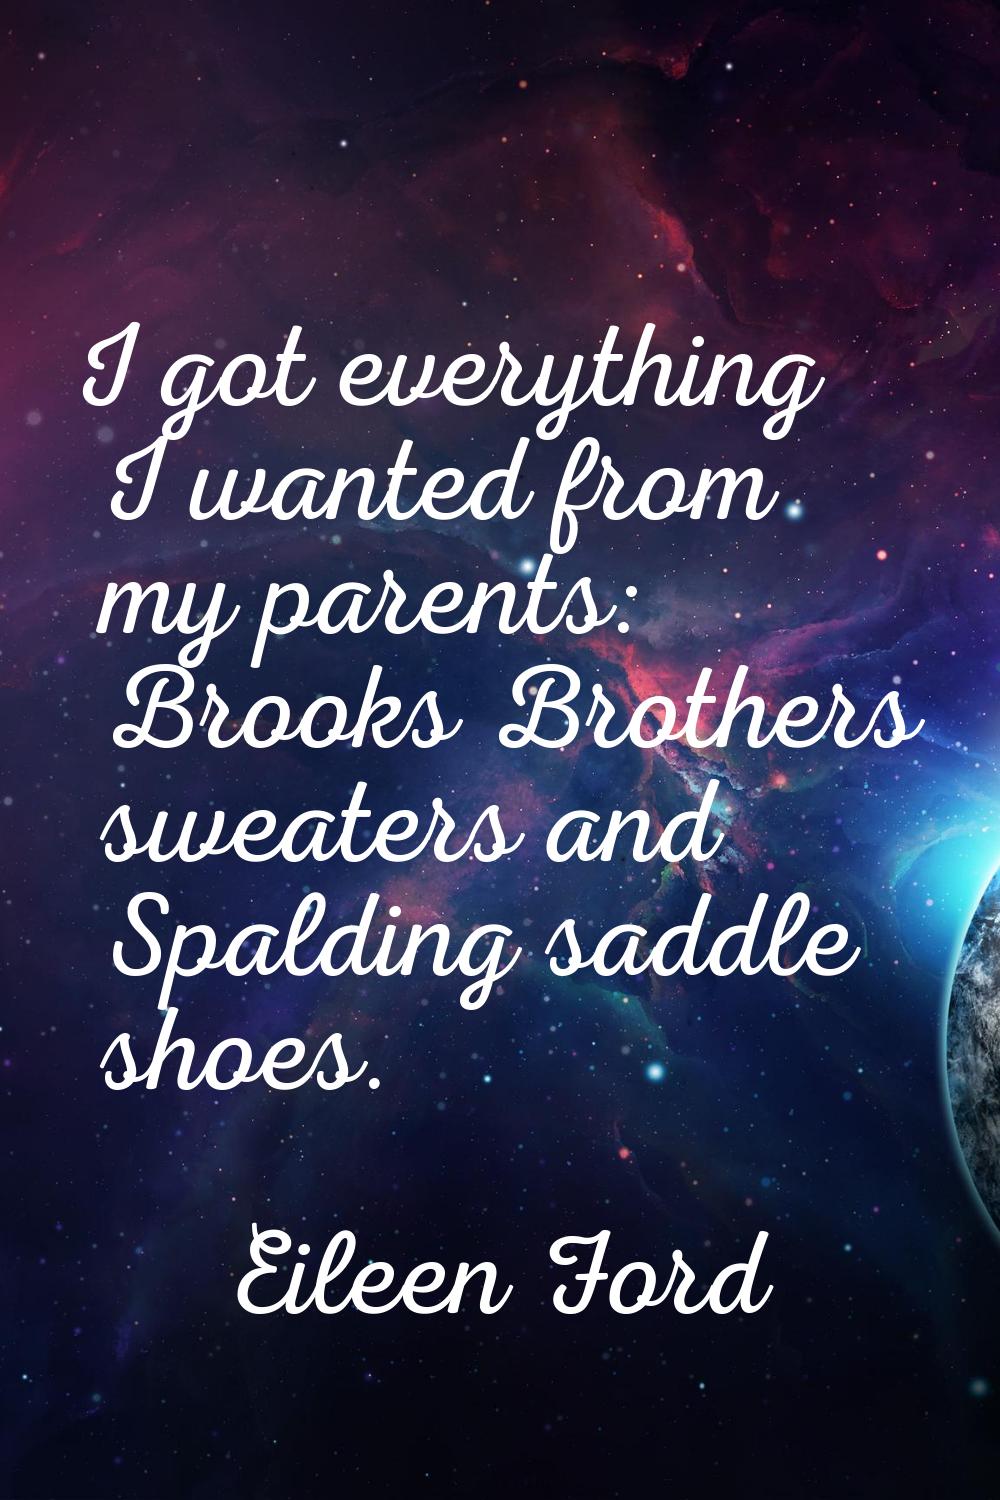 I got everything I wanted from my parents: Brooks Brothers sweaters and Spalding saddle shoes.